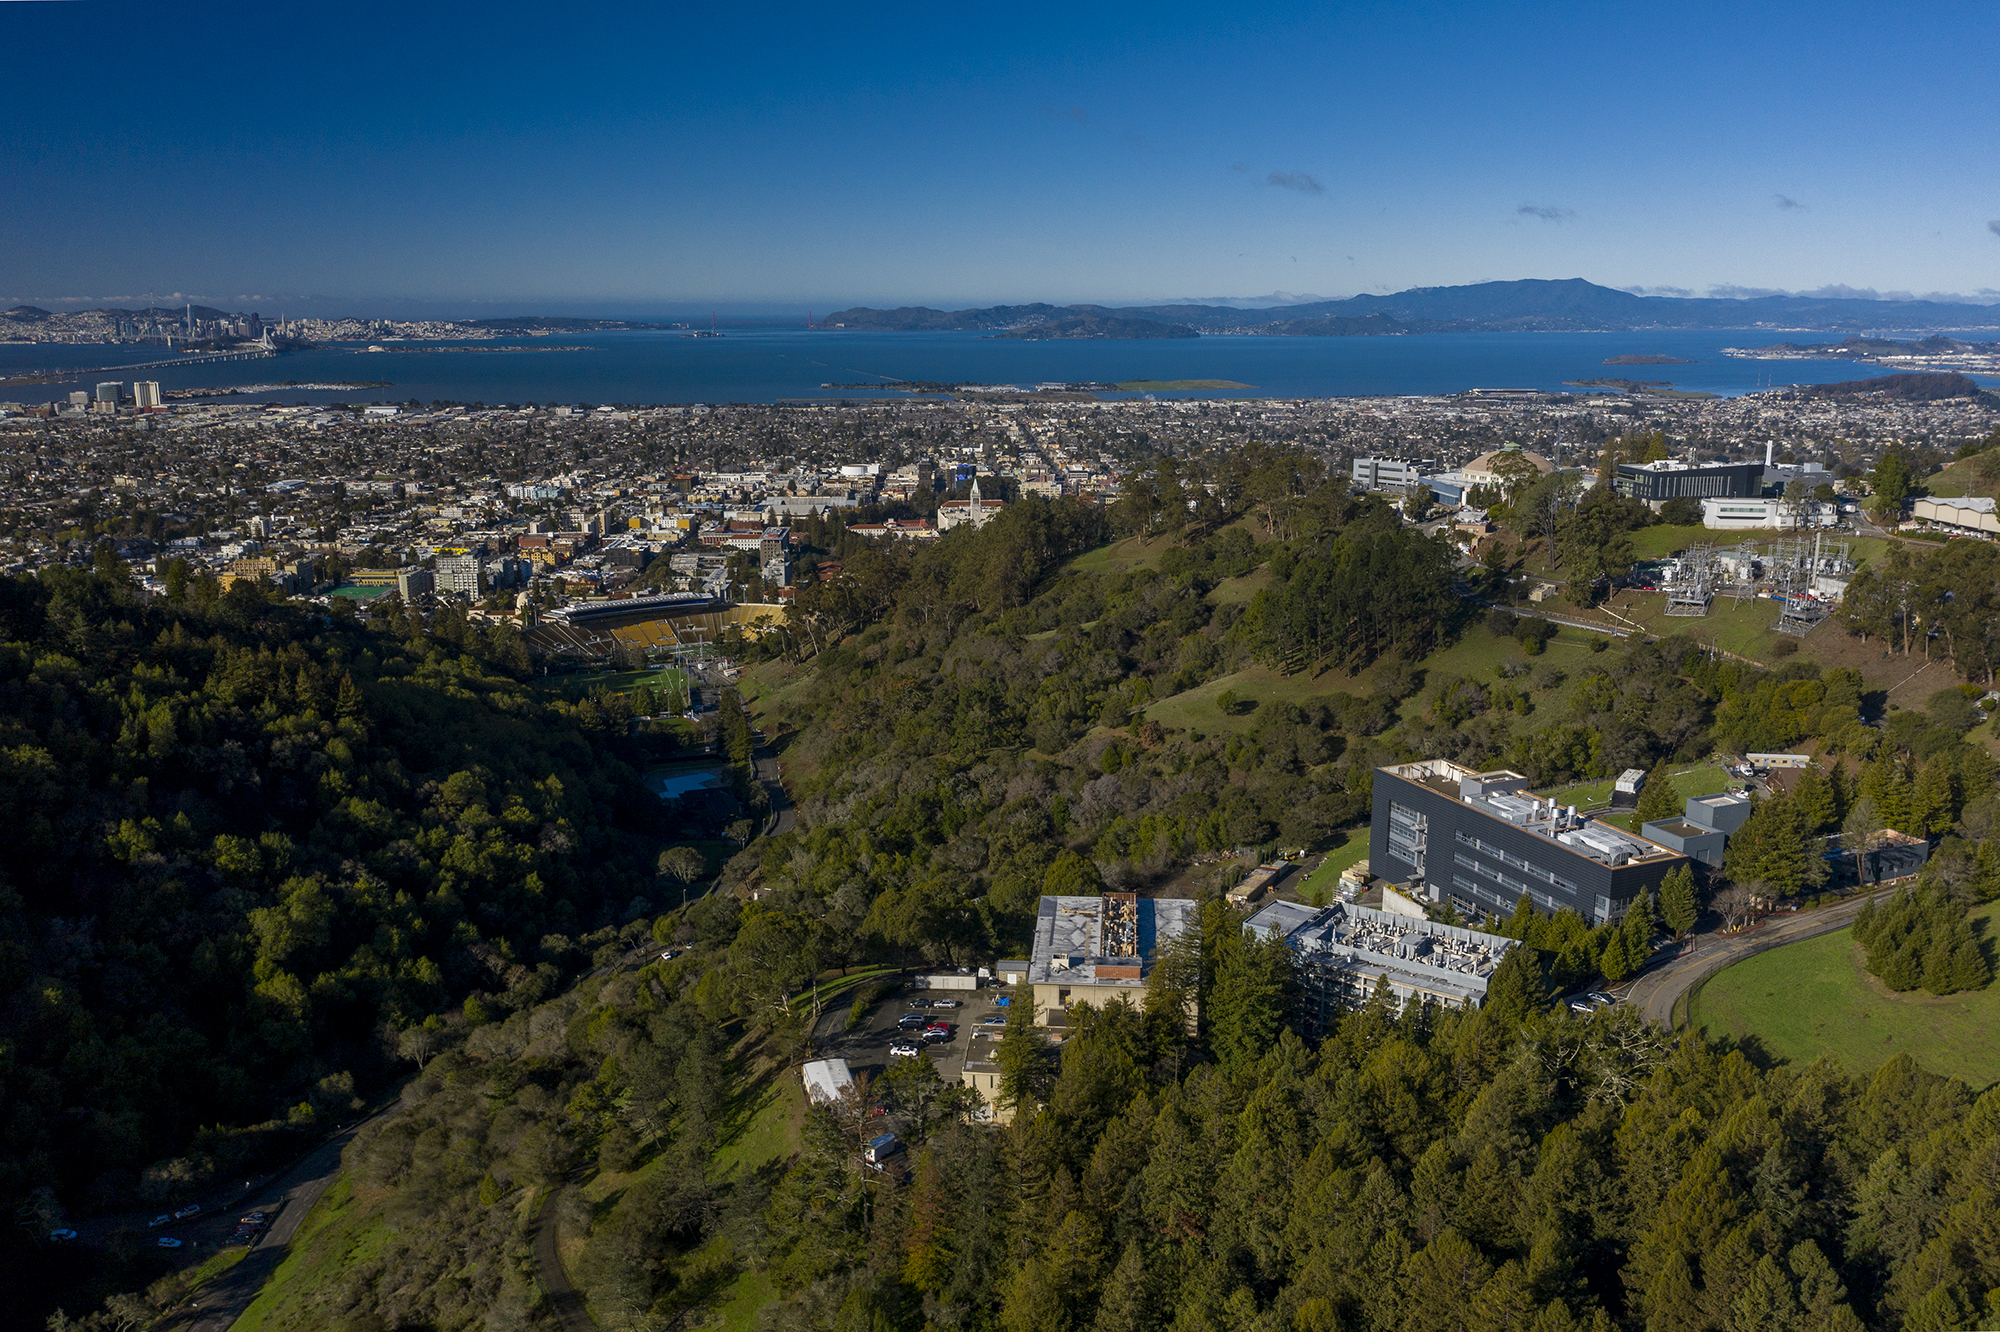 An aerial view of the National Energy Research Scientific Computing Center (NERSC) in the foreground, with the rest of the Berkeley Lab and the Berkeley Hills in the background